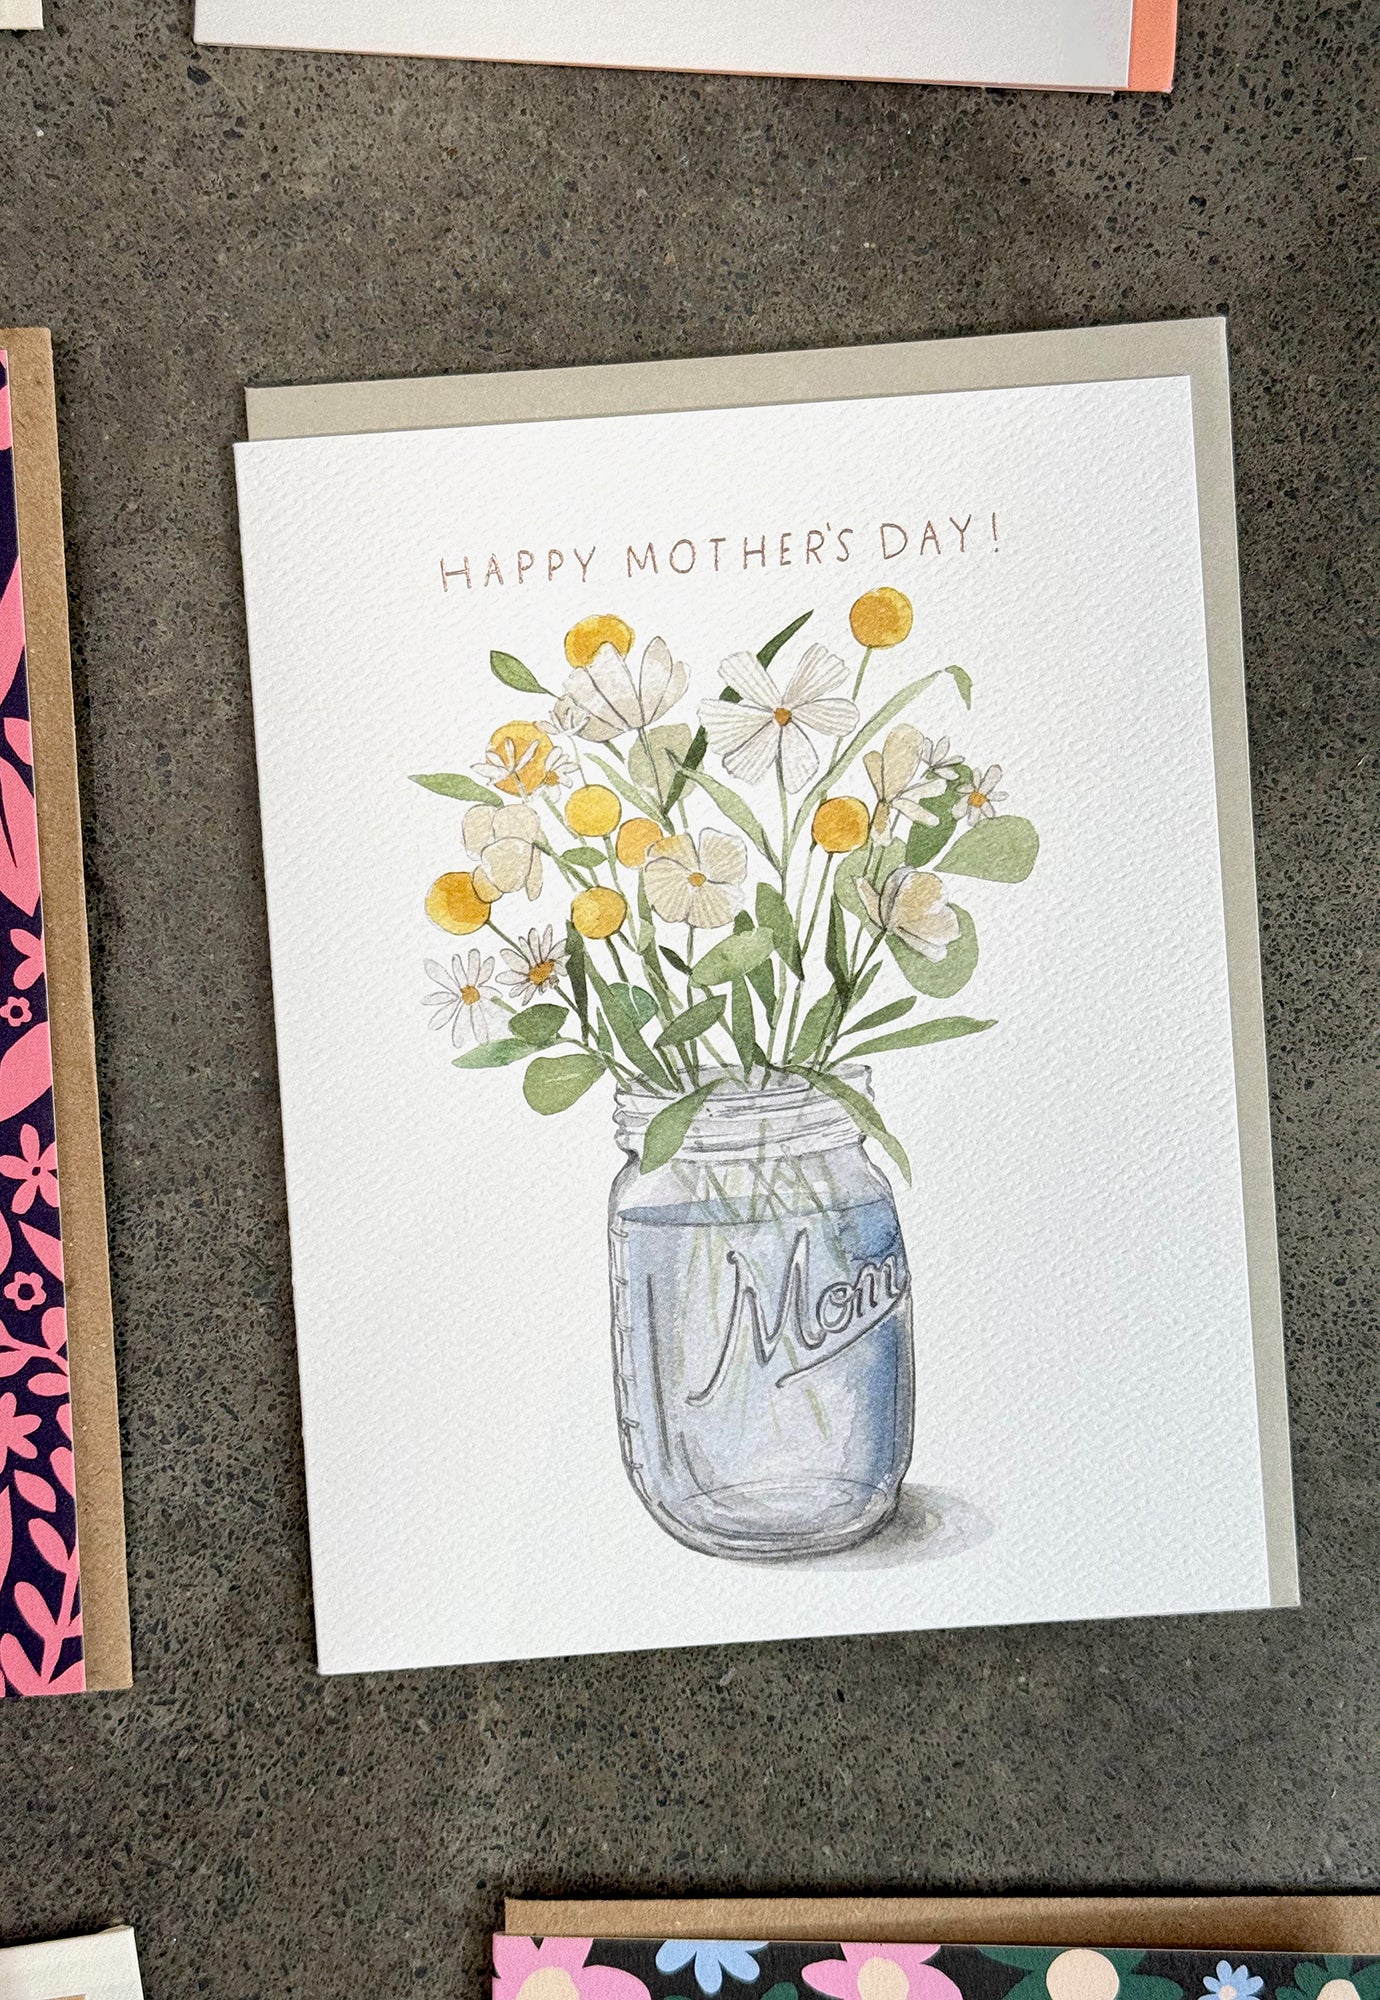 mother's day cards